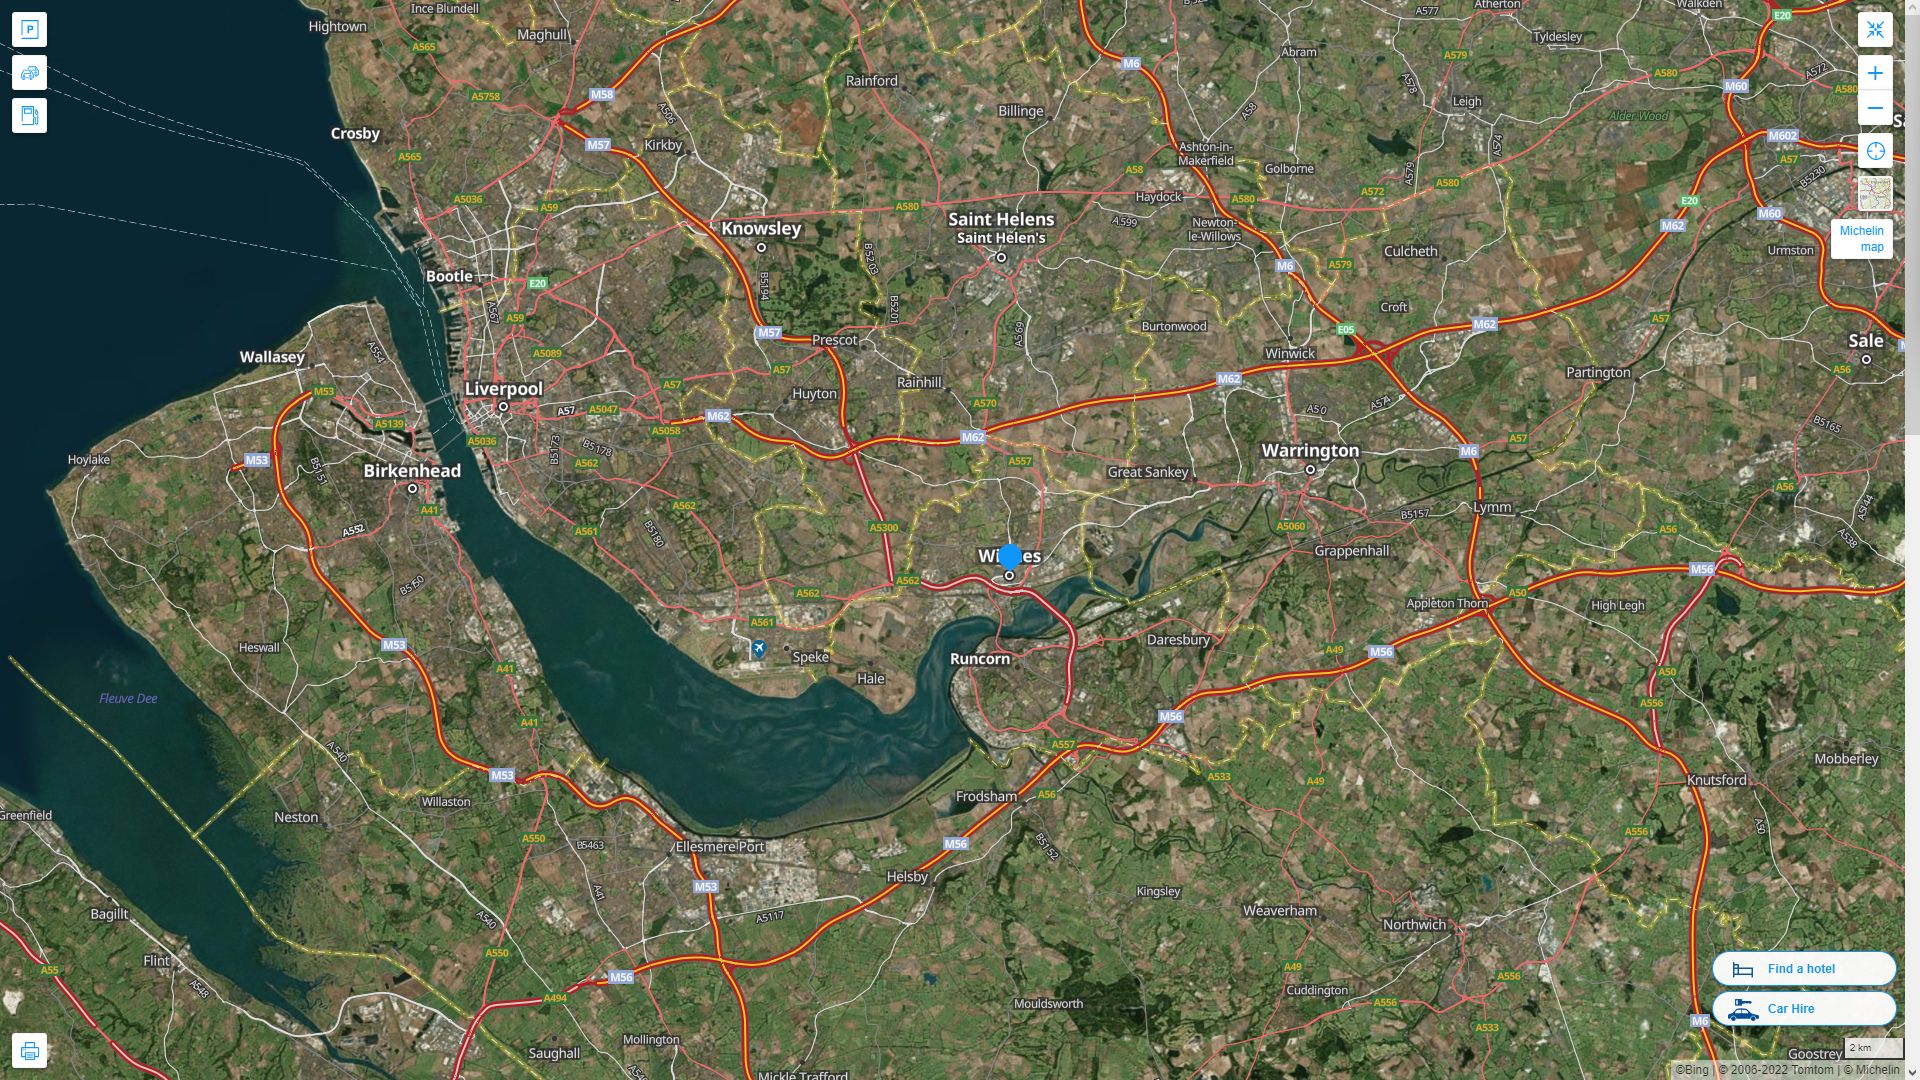 Widnes Highway and Road Map with Satellite View